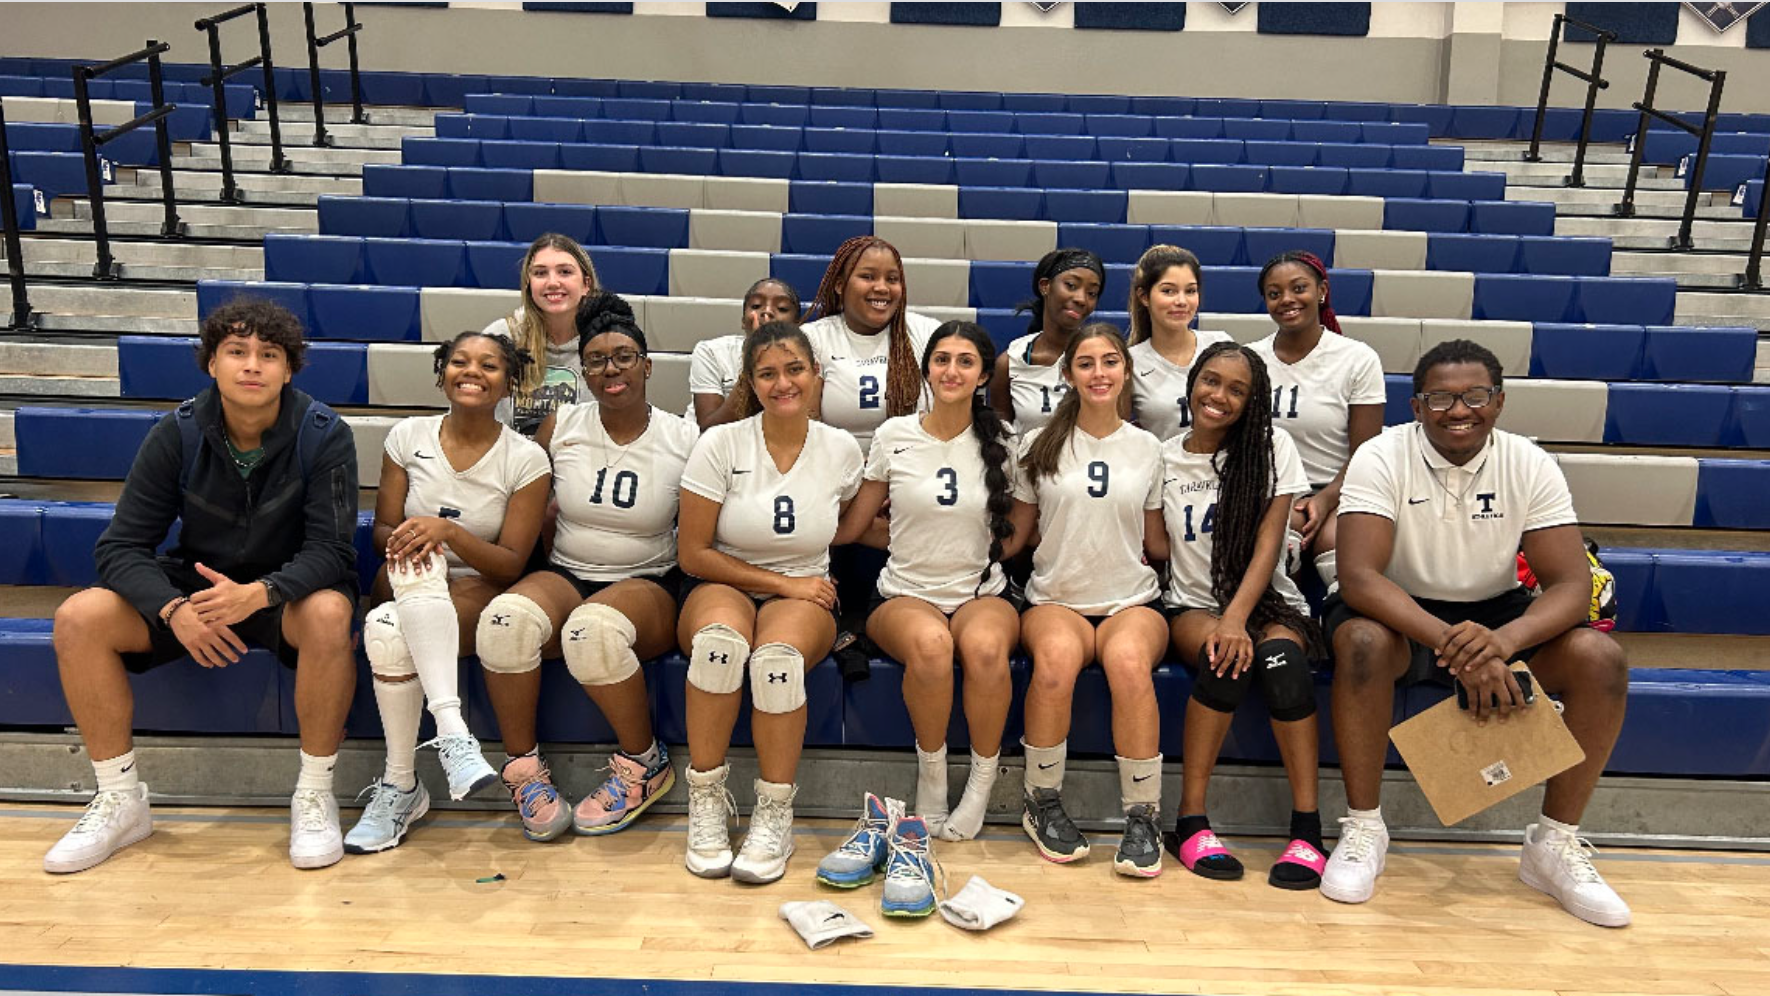 Coral Springs Athletics Recap: Swimming and Volleyball